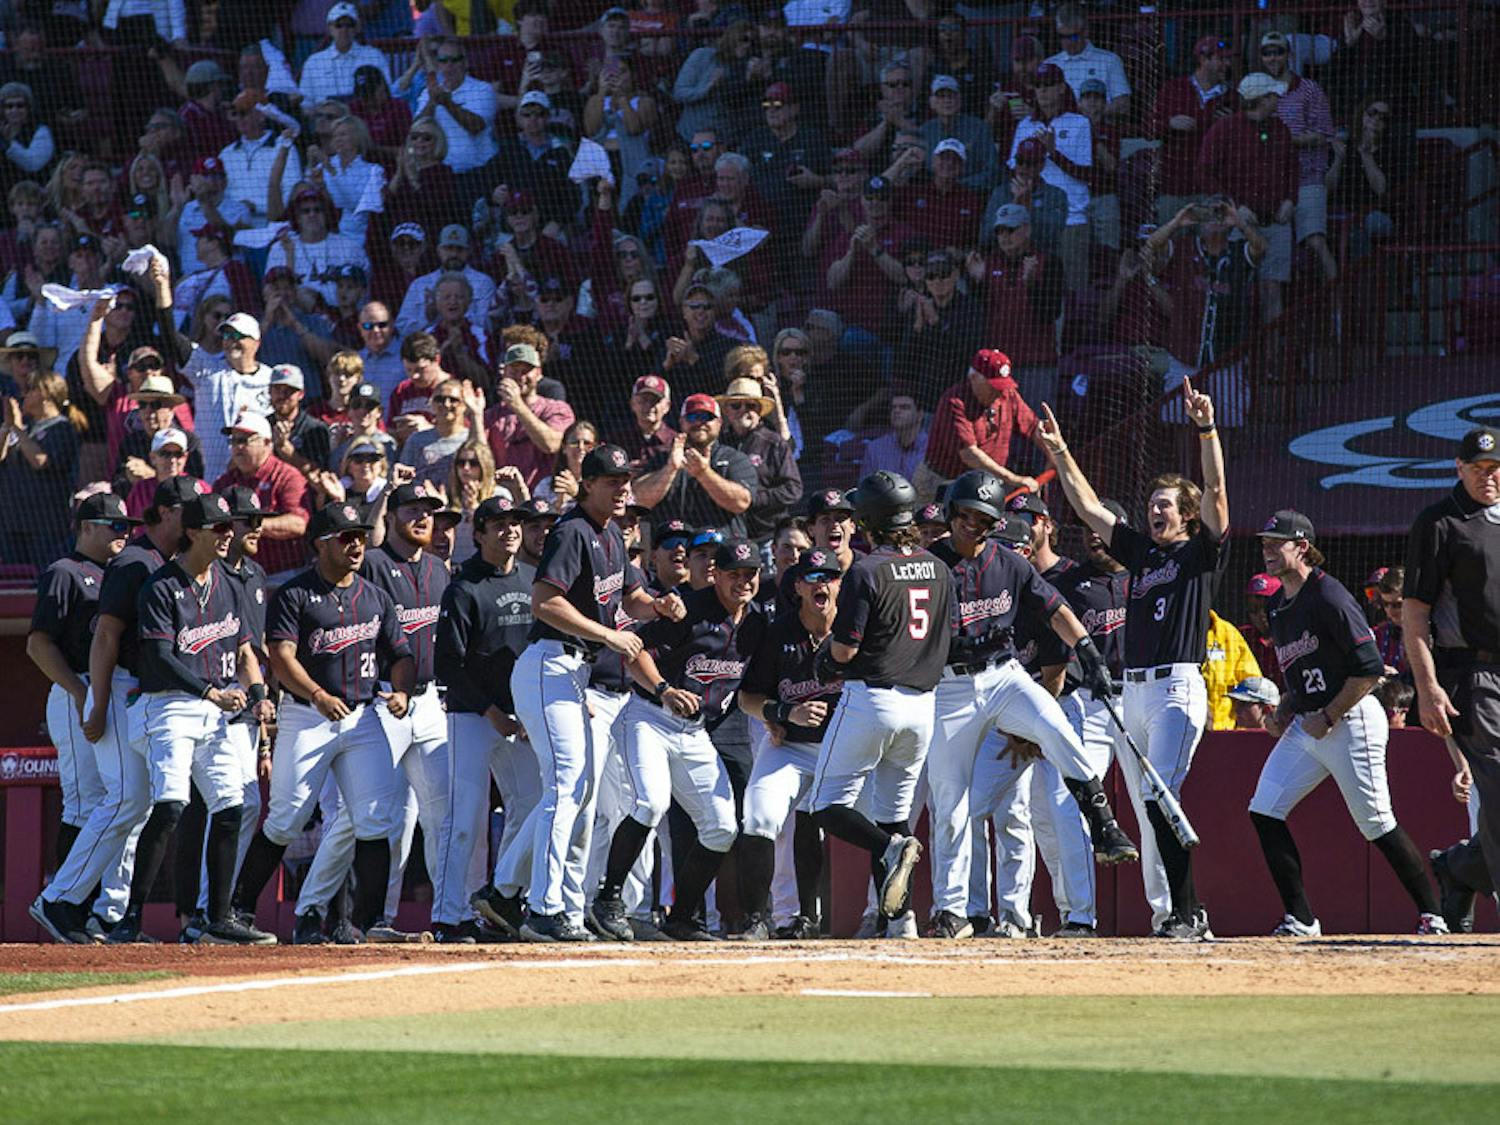 The South Carolina baseball team celebrates after junior first baseman Gavin Casas hits a home run in the fourth inning against Clemson at Founders Park on March 5, 2023. The Gamecocks beat the Tigers 7-1, defeating it 2-1 in the series.&nbsp;